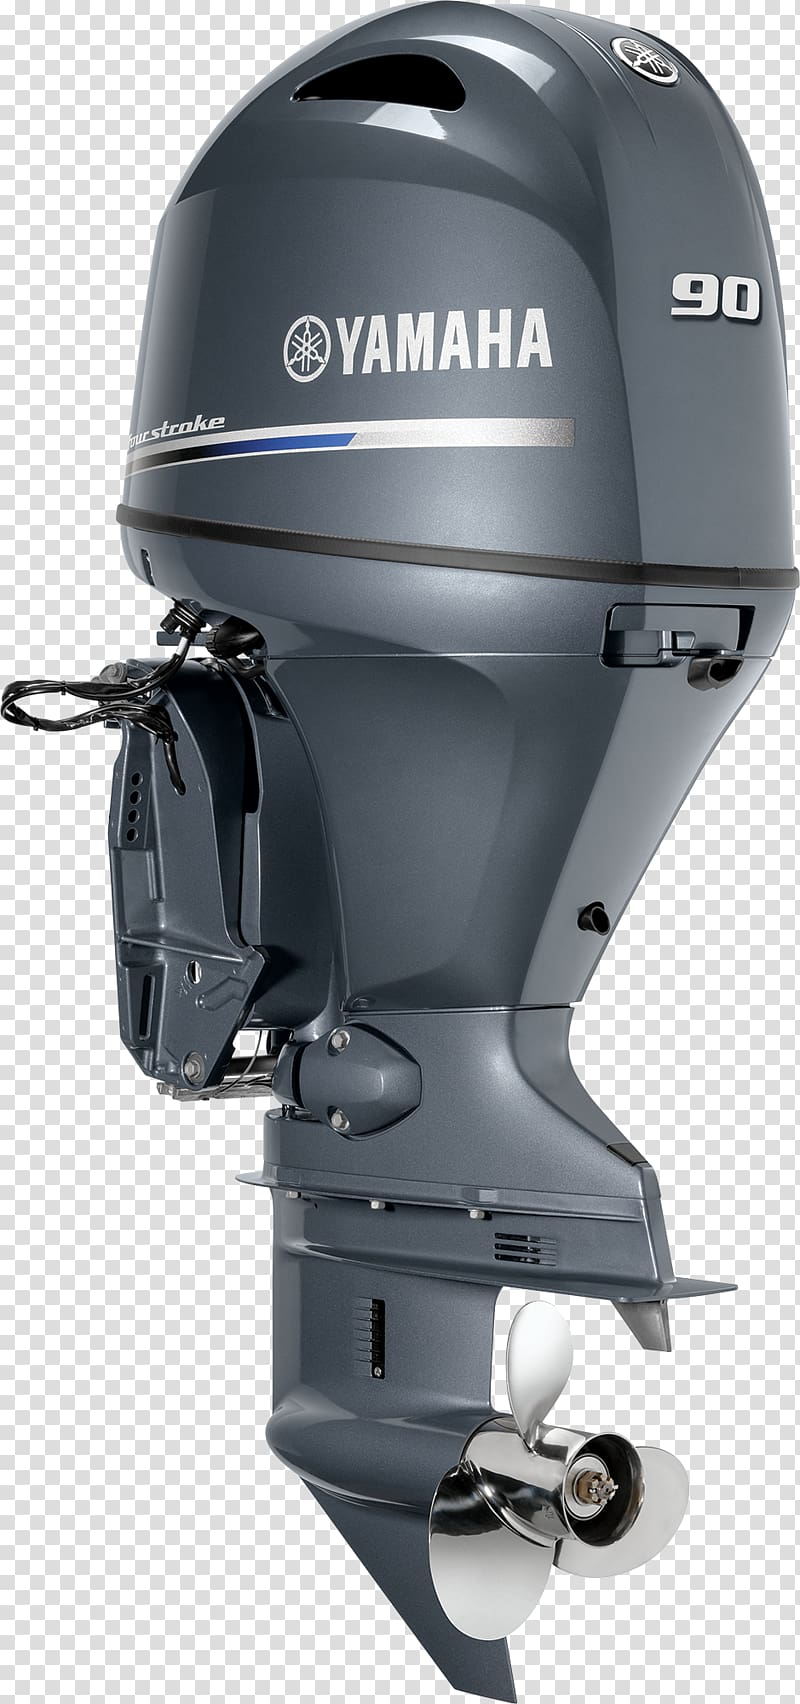 Yamaha Motor Company Outboard motor Boat Four-stroke engine, boat transparent background PNG clipart